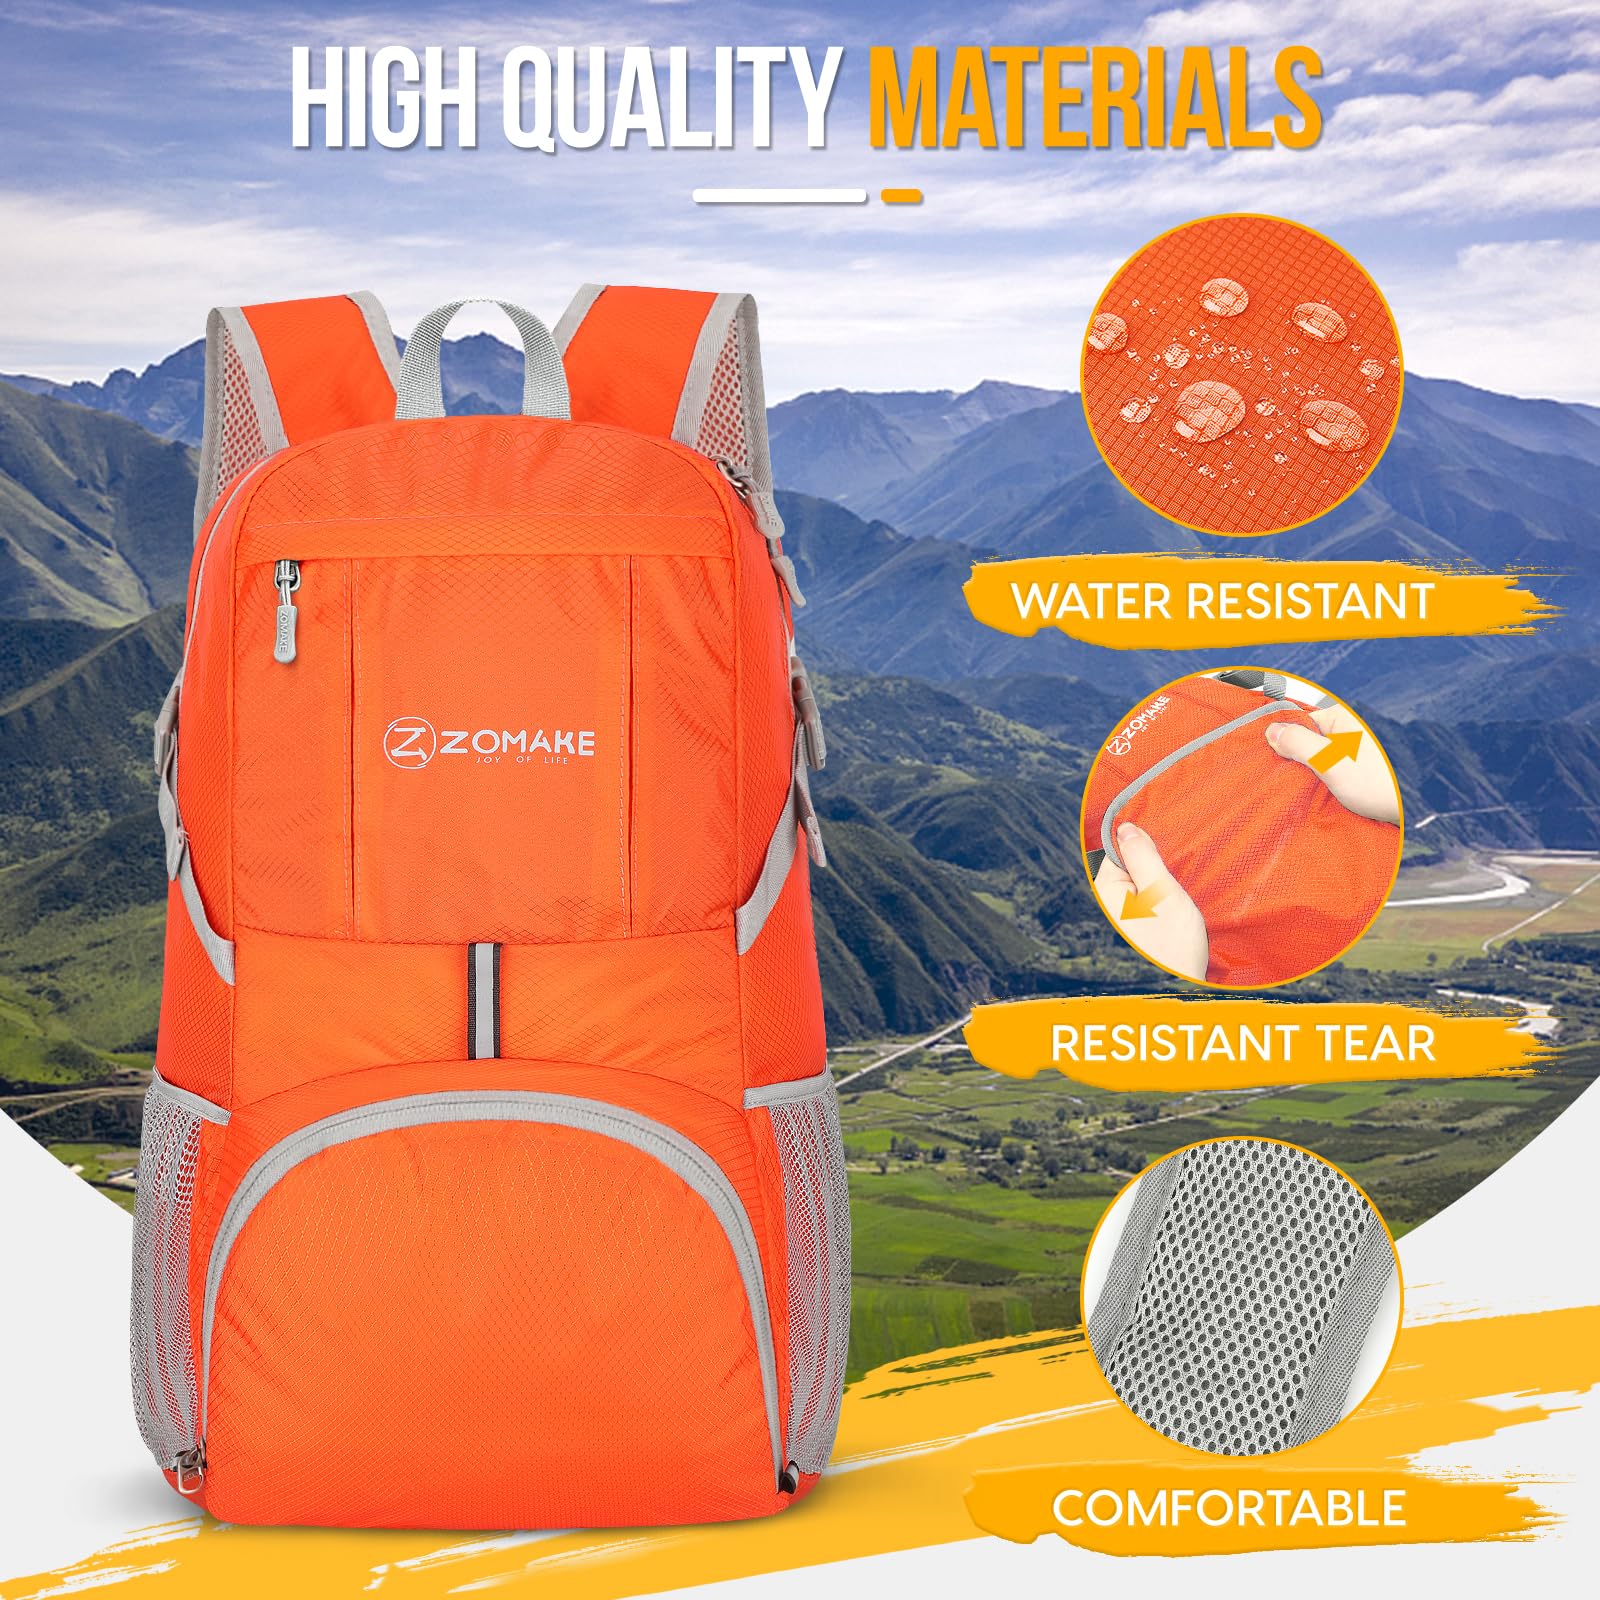 ZOMAKE Lightweight Packable Backpack 35L - Light Foldable Hiking Backpacks Water Resistant Collapsible Daypack for Travel